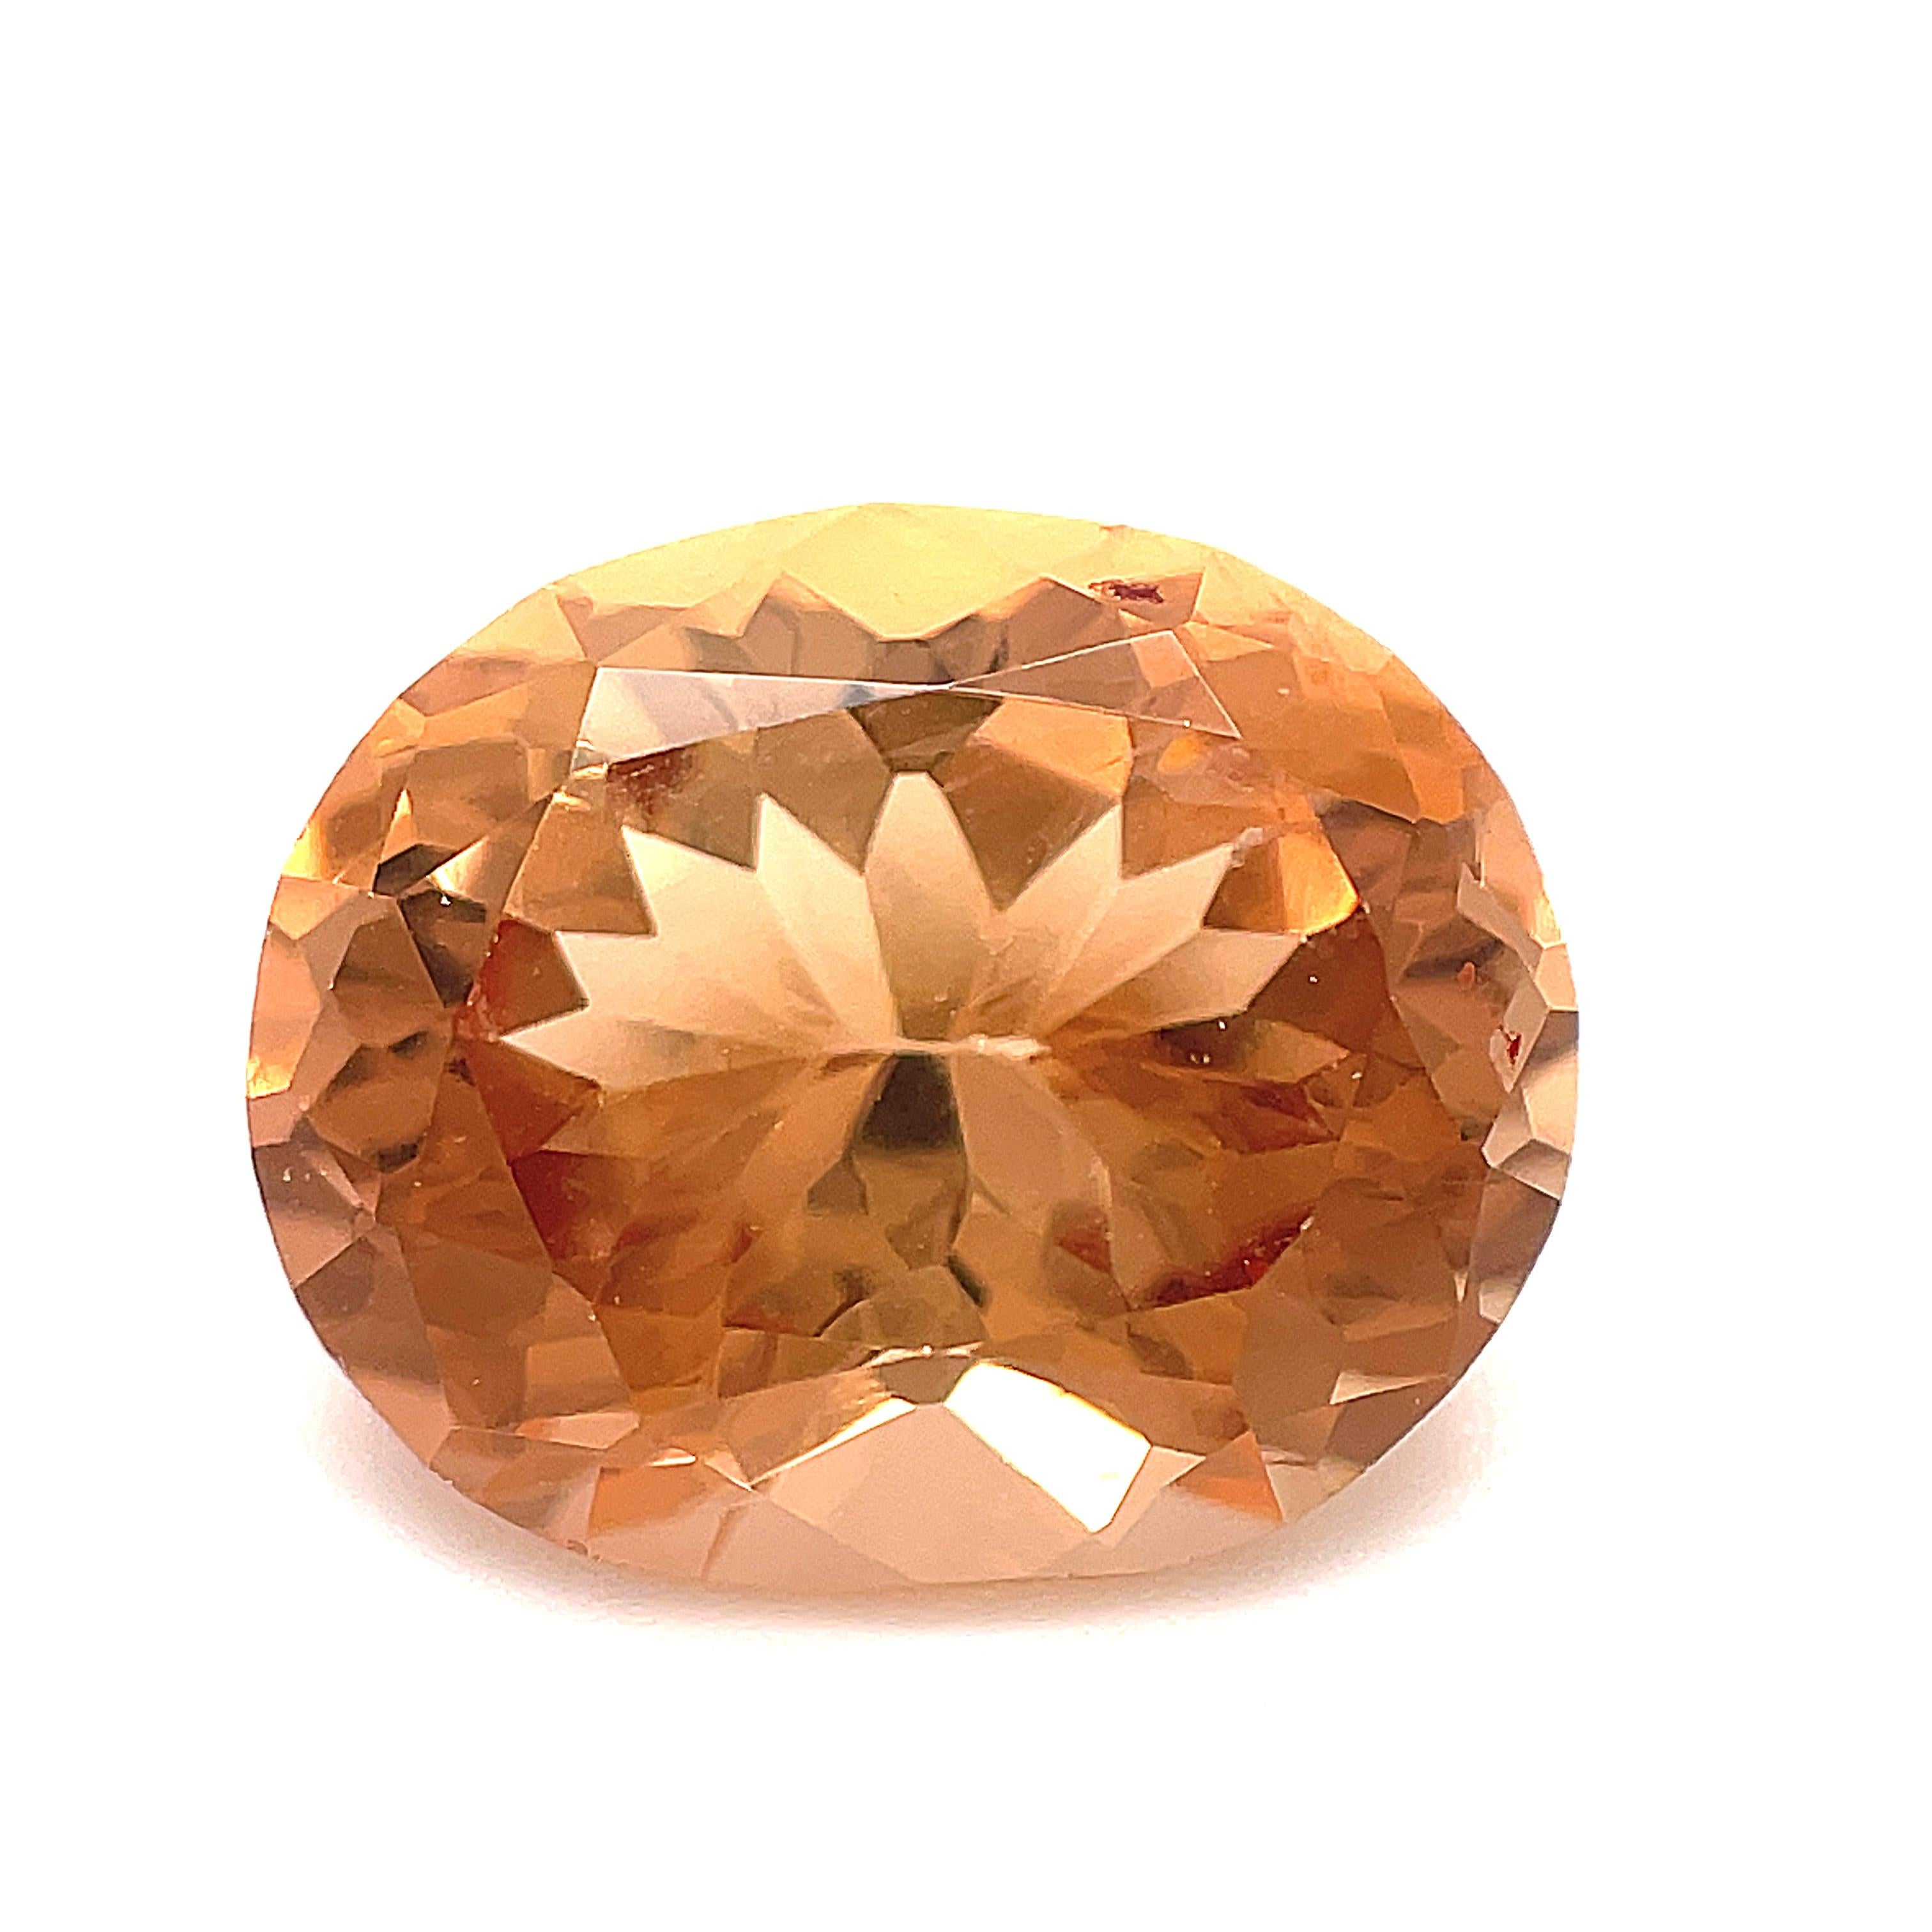 This beautiful 8.21 carat precious topaz oval is just stunning! With its lovely sparkling sherry color and exceptional brilliance, it will make a gorgeous ring or pendant! This precious topaz measures 13.46 x 11.12 carats and has a warm peachy color